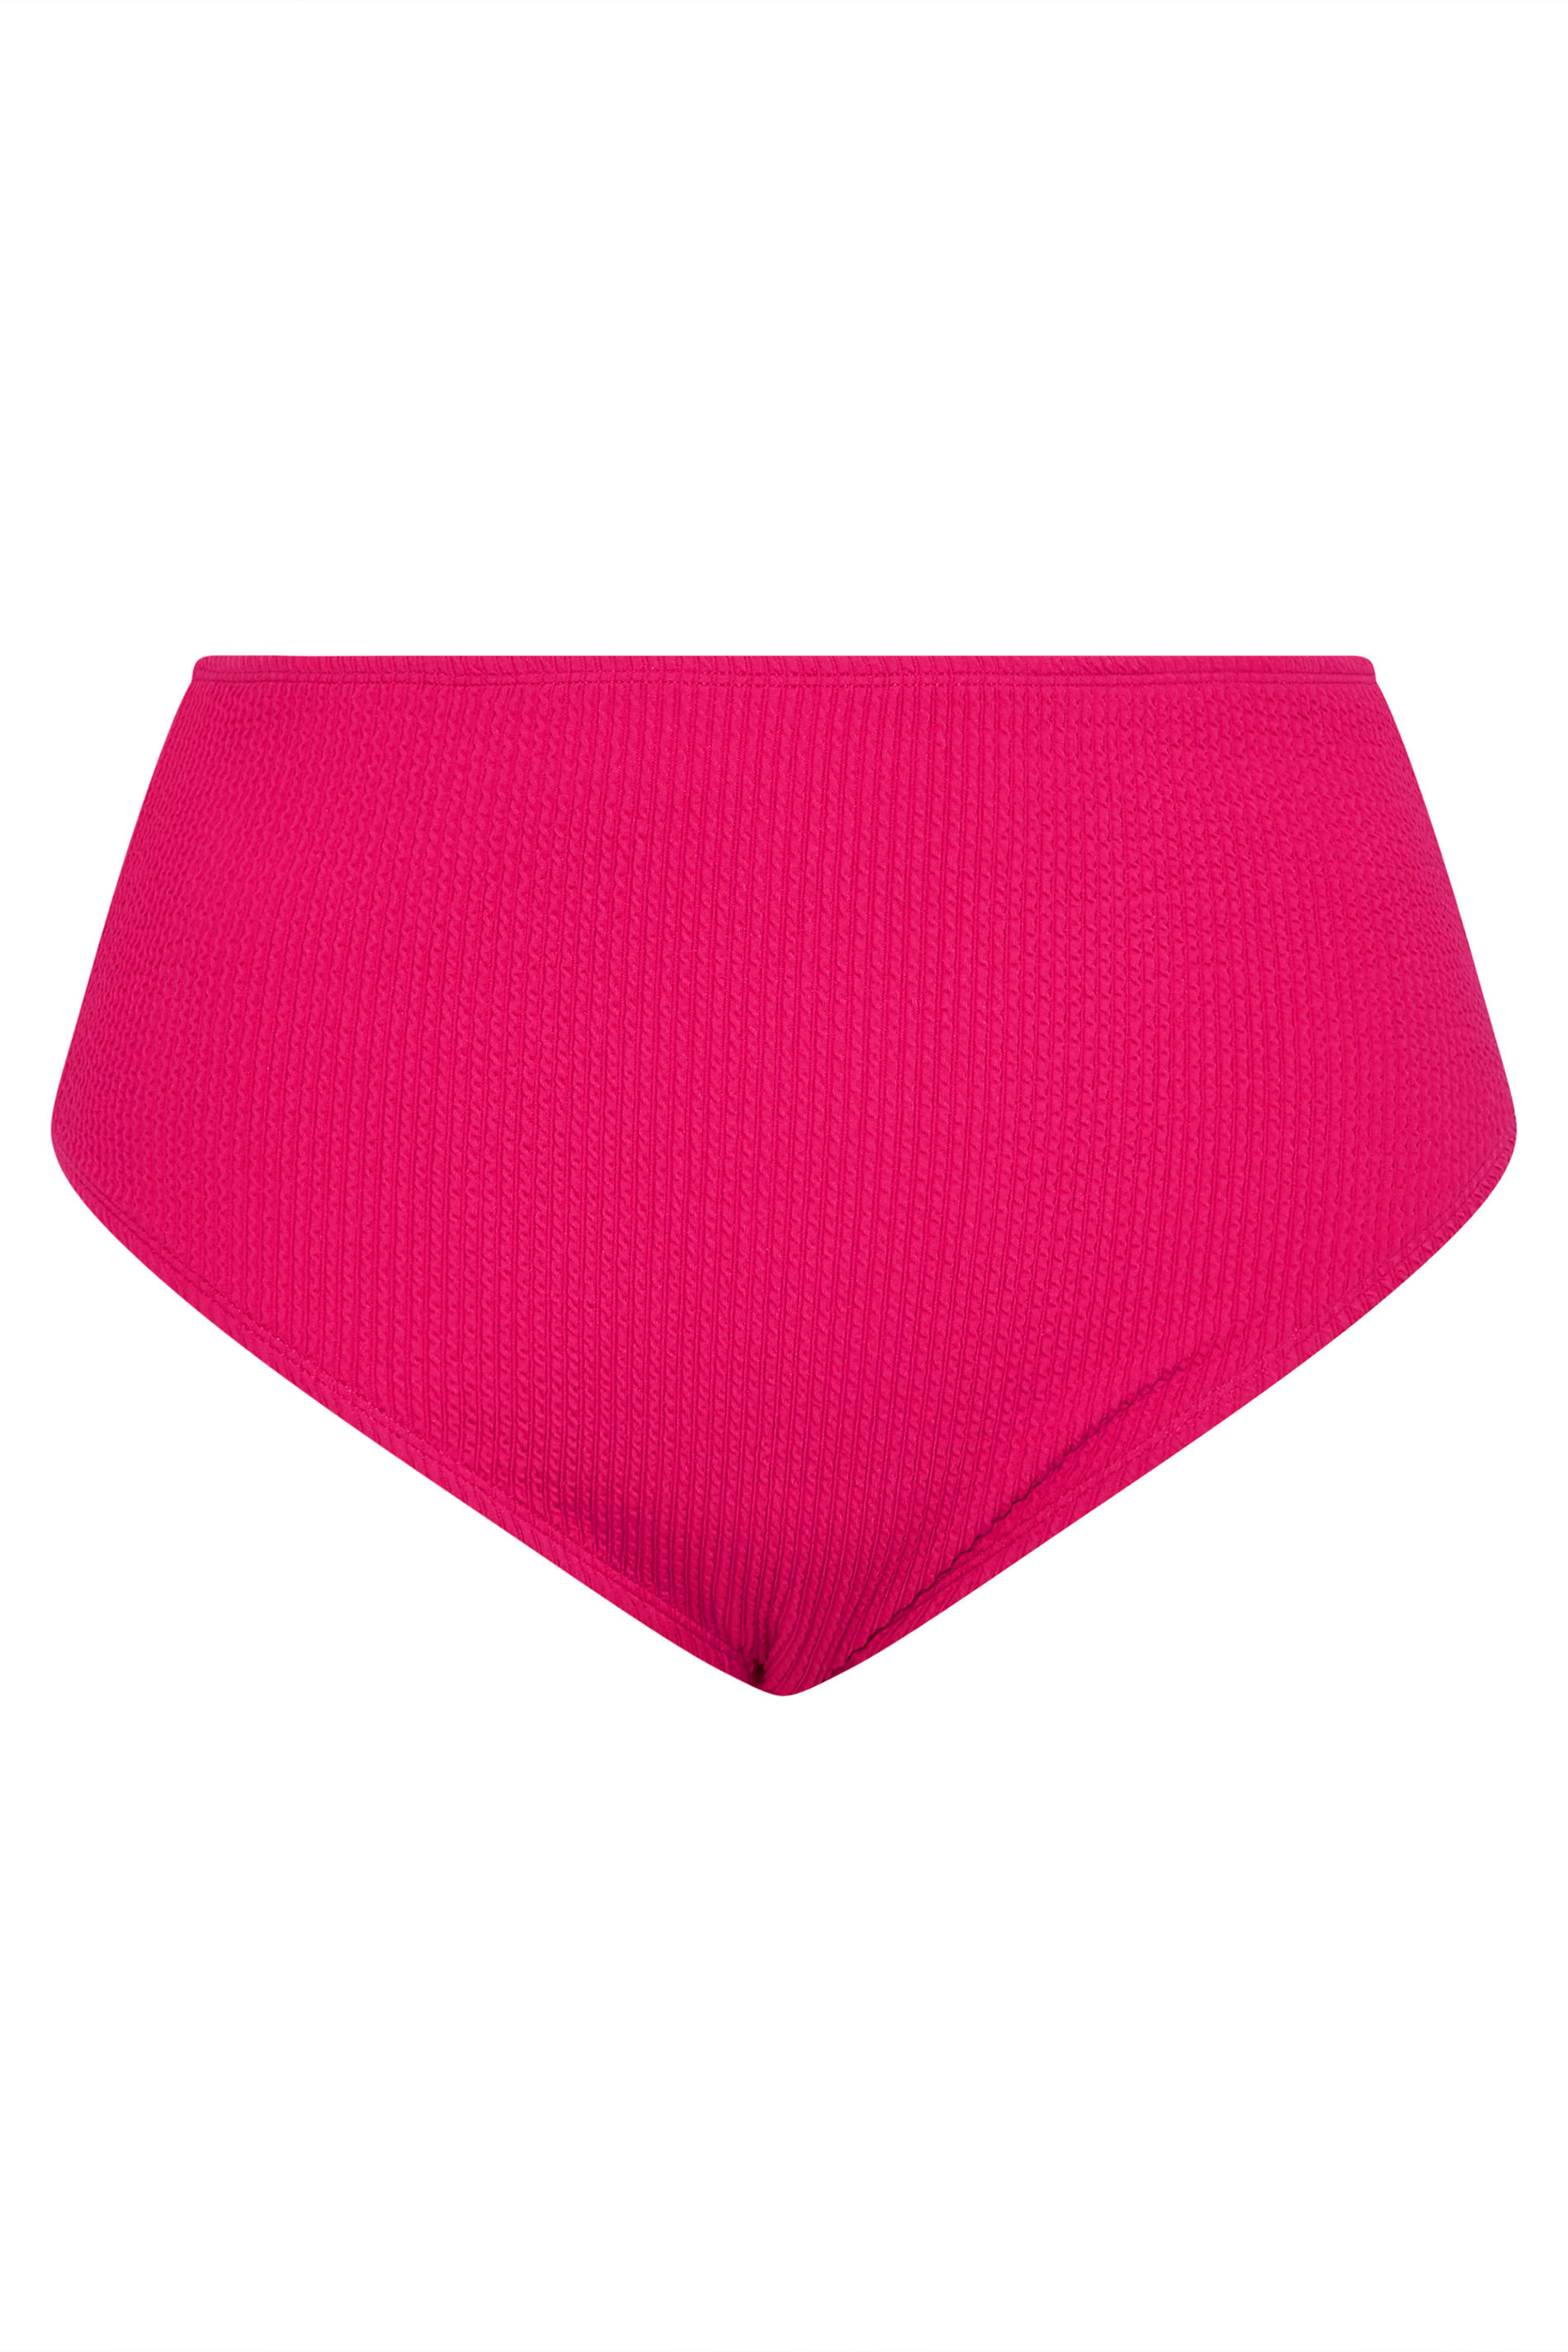 Plus Size Hot Pink Textured High Waisted Tummy Control Bikini Briefs | Yours Clothing 3